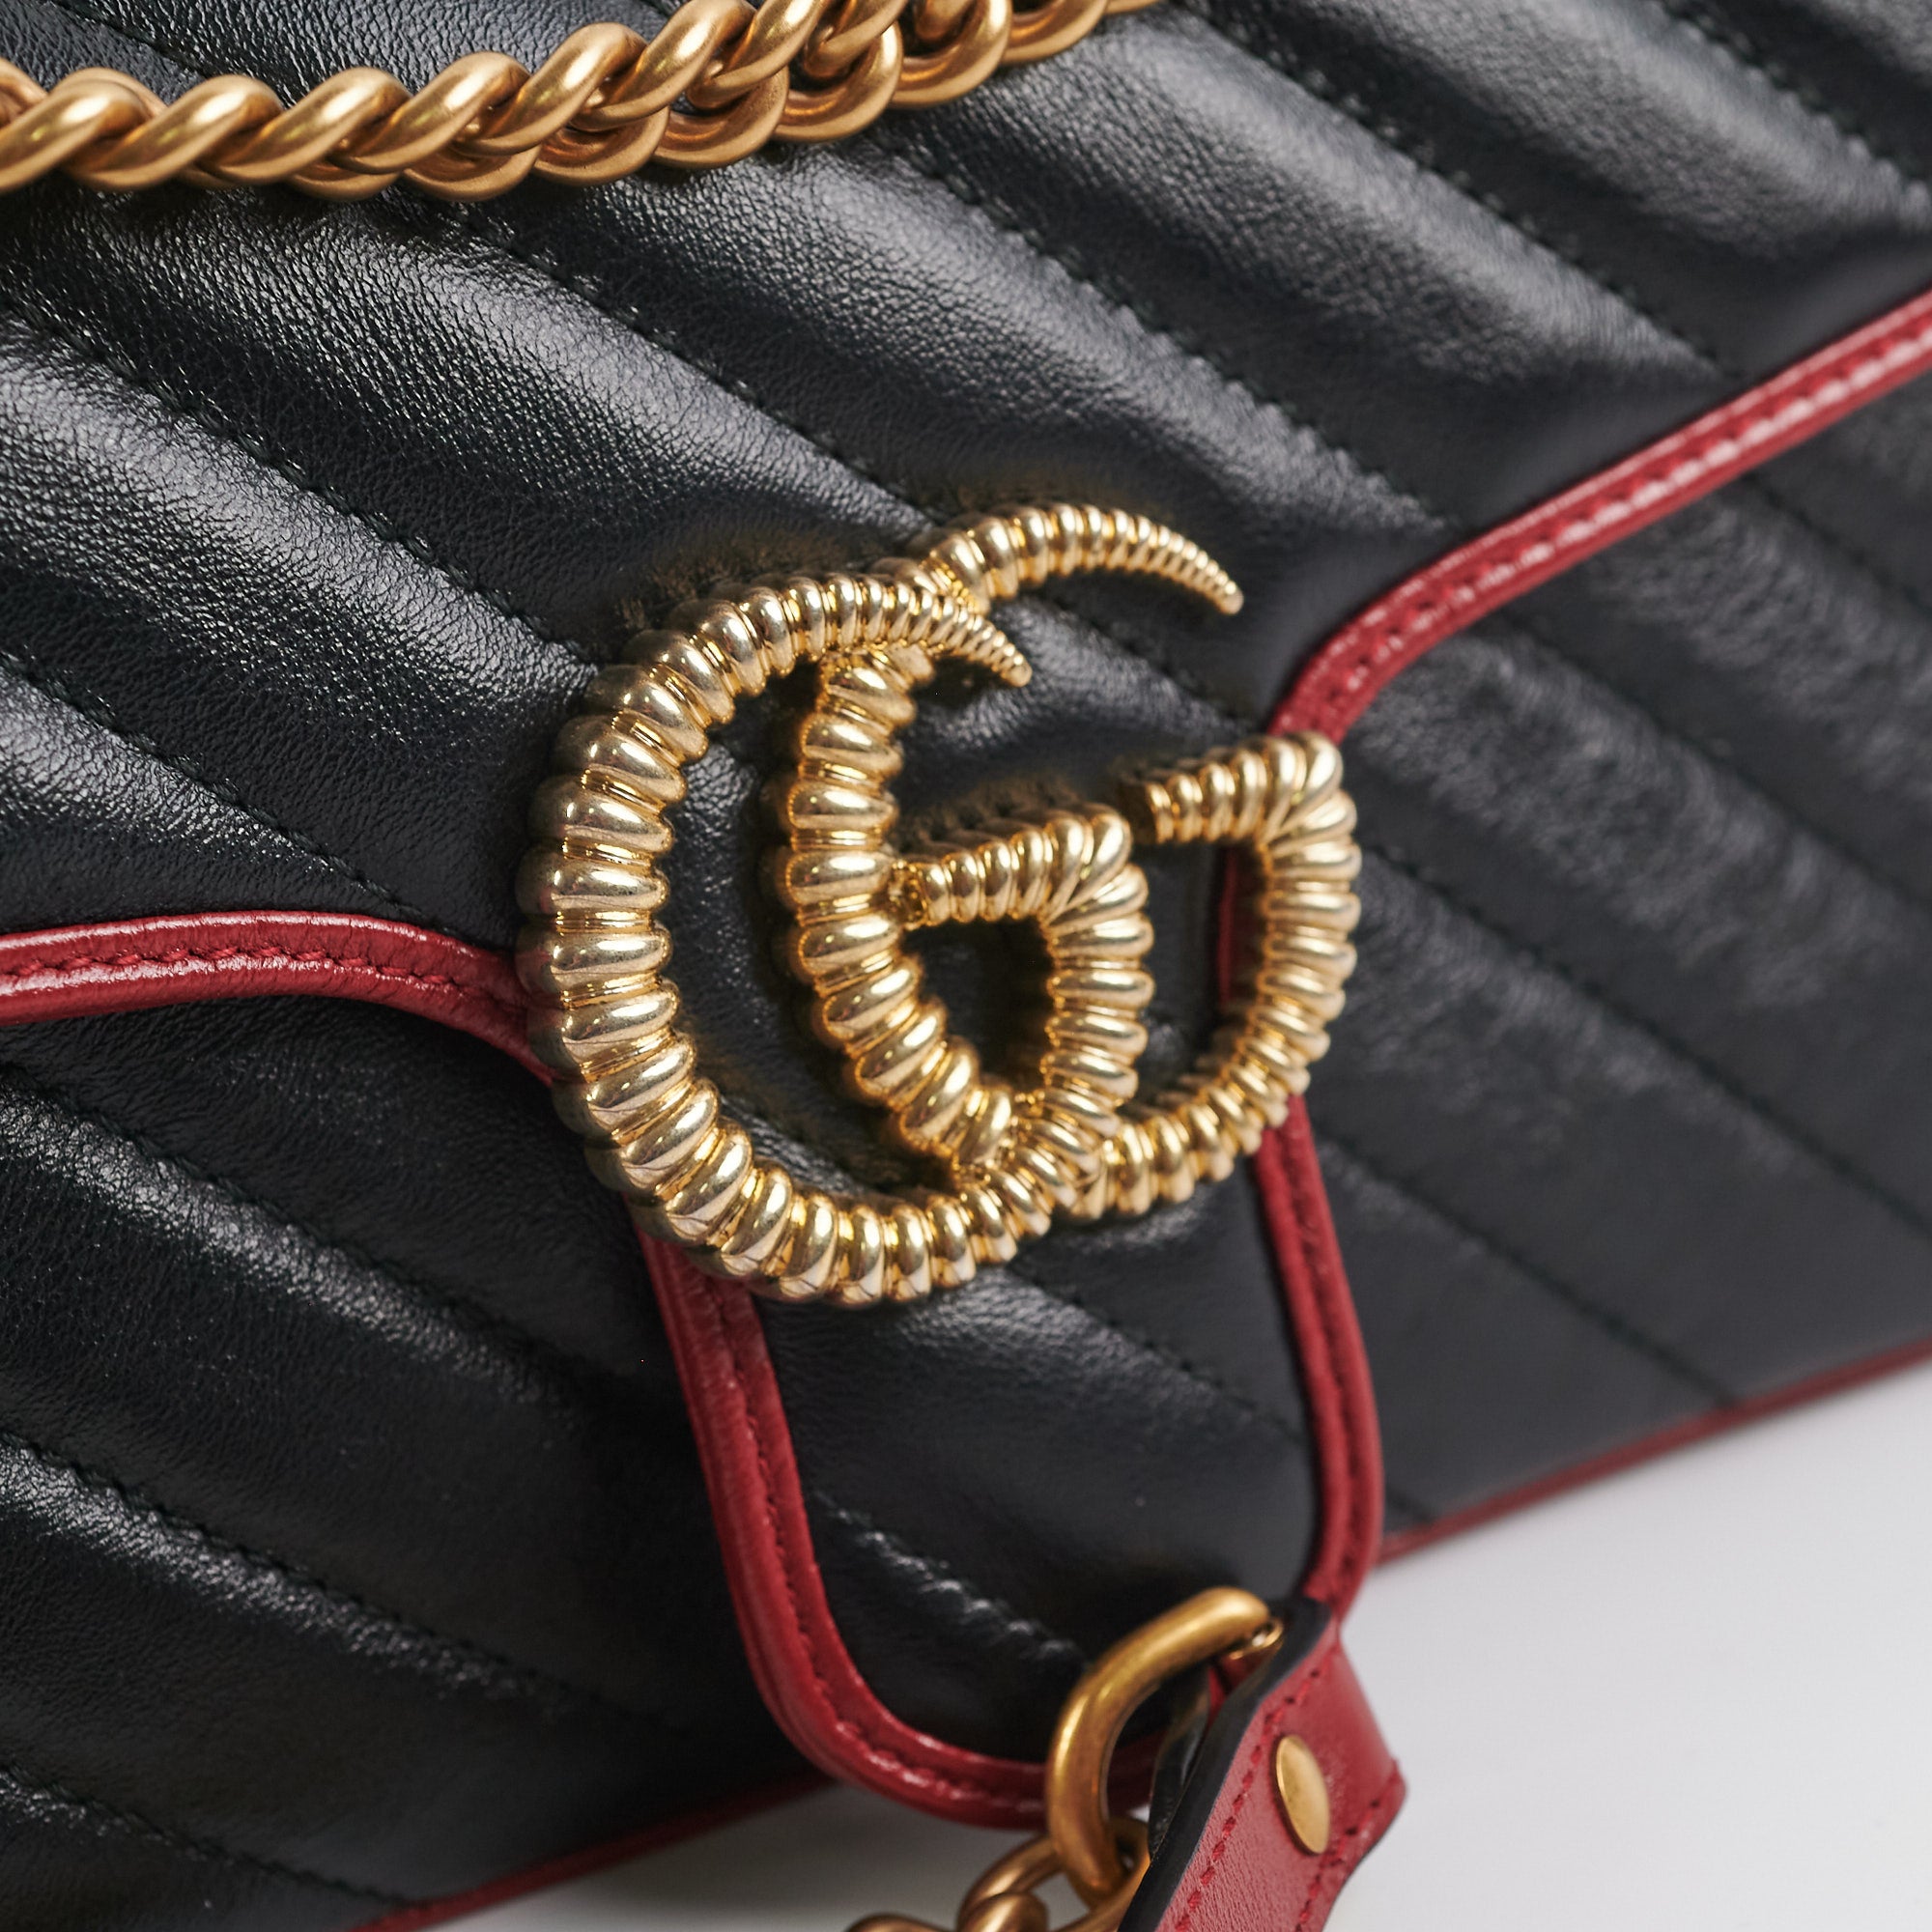 Gucci women's GG Marmont 2.0 mini bag - buy for 630900 KZT in the official  Viled online store, art. 699514 DTDHT.6832_U_232